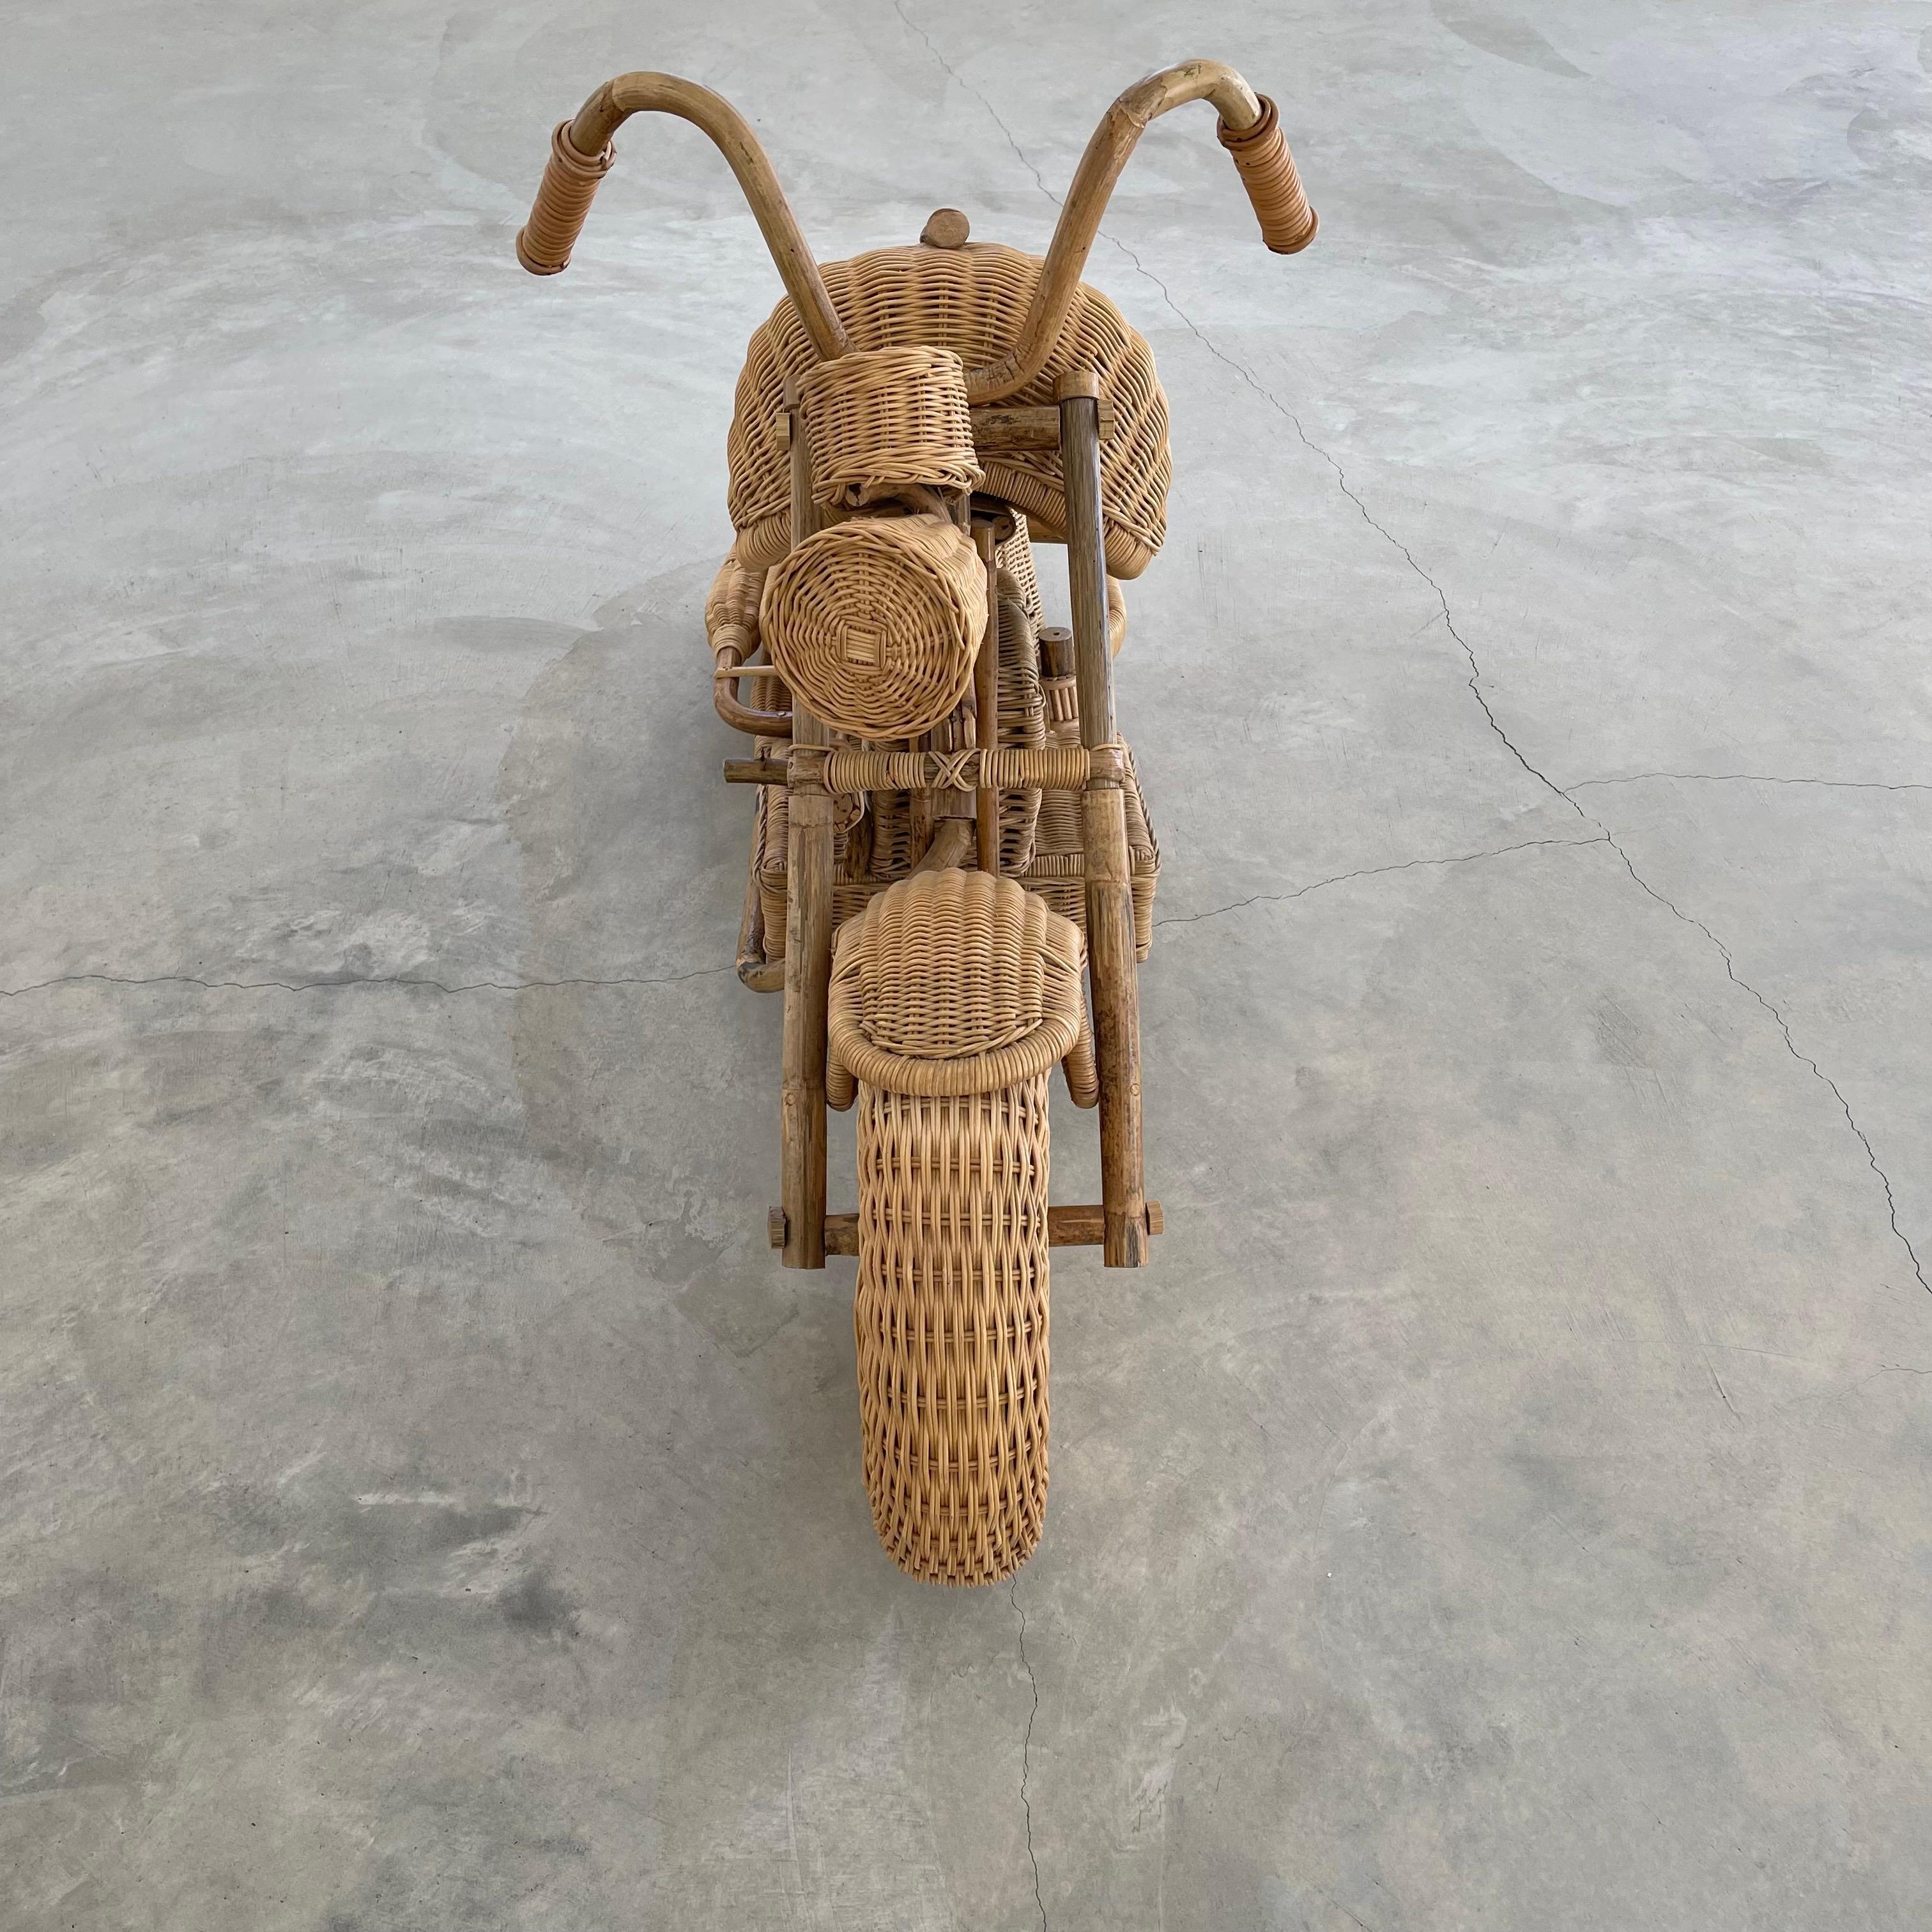 Massive Rattan, Bamboo and Wicker Harley Davidson Motorcycle For Sale 1